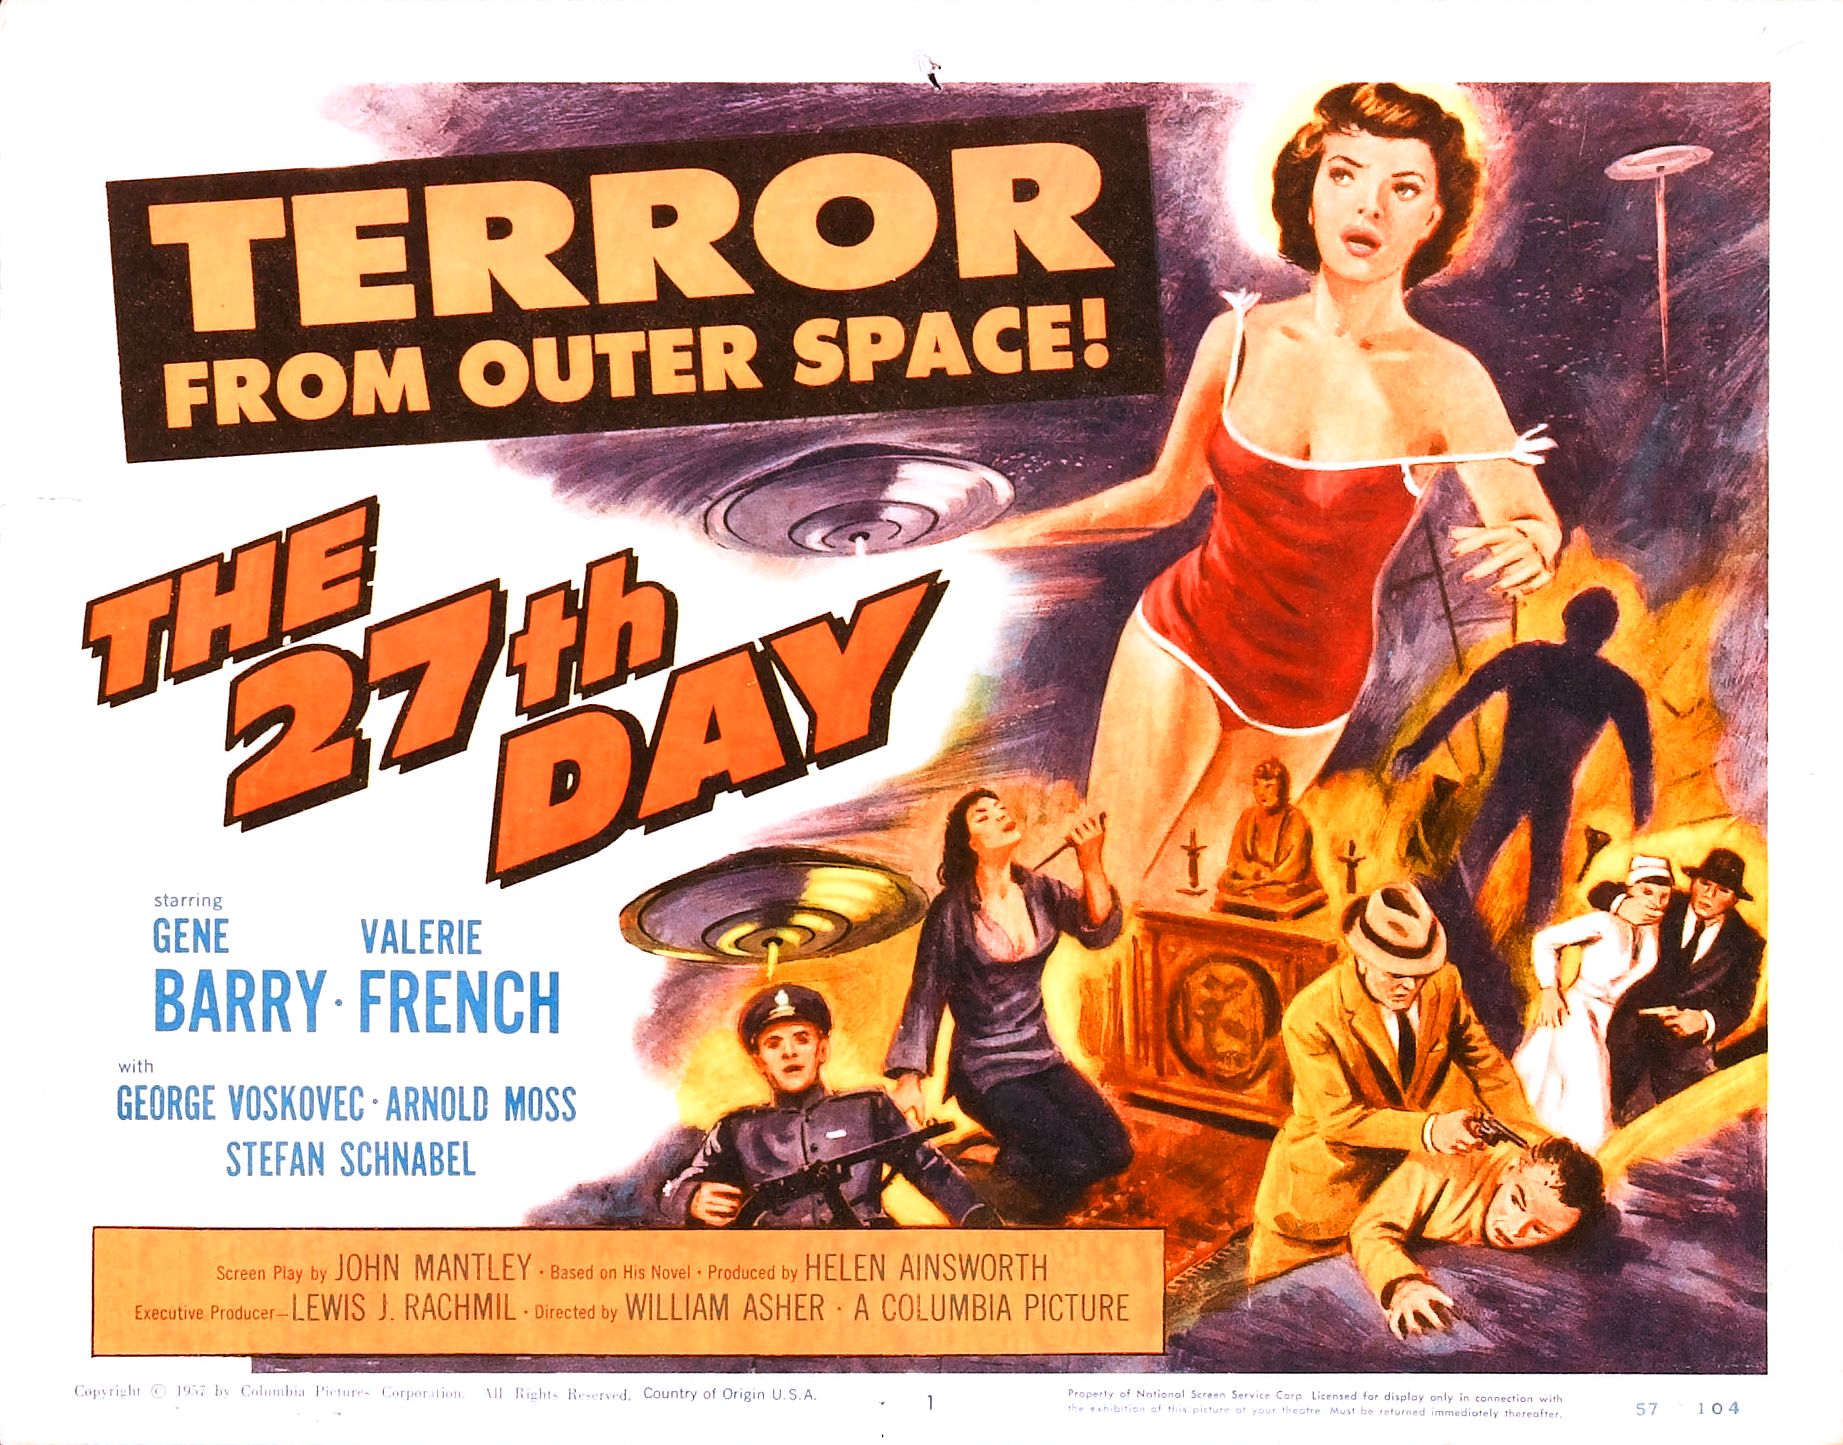 The 27th Day (1957)